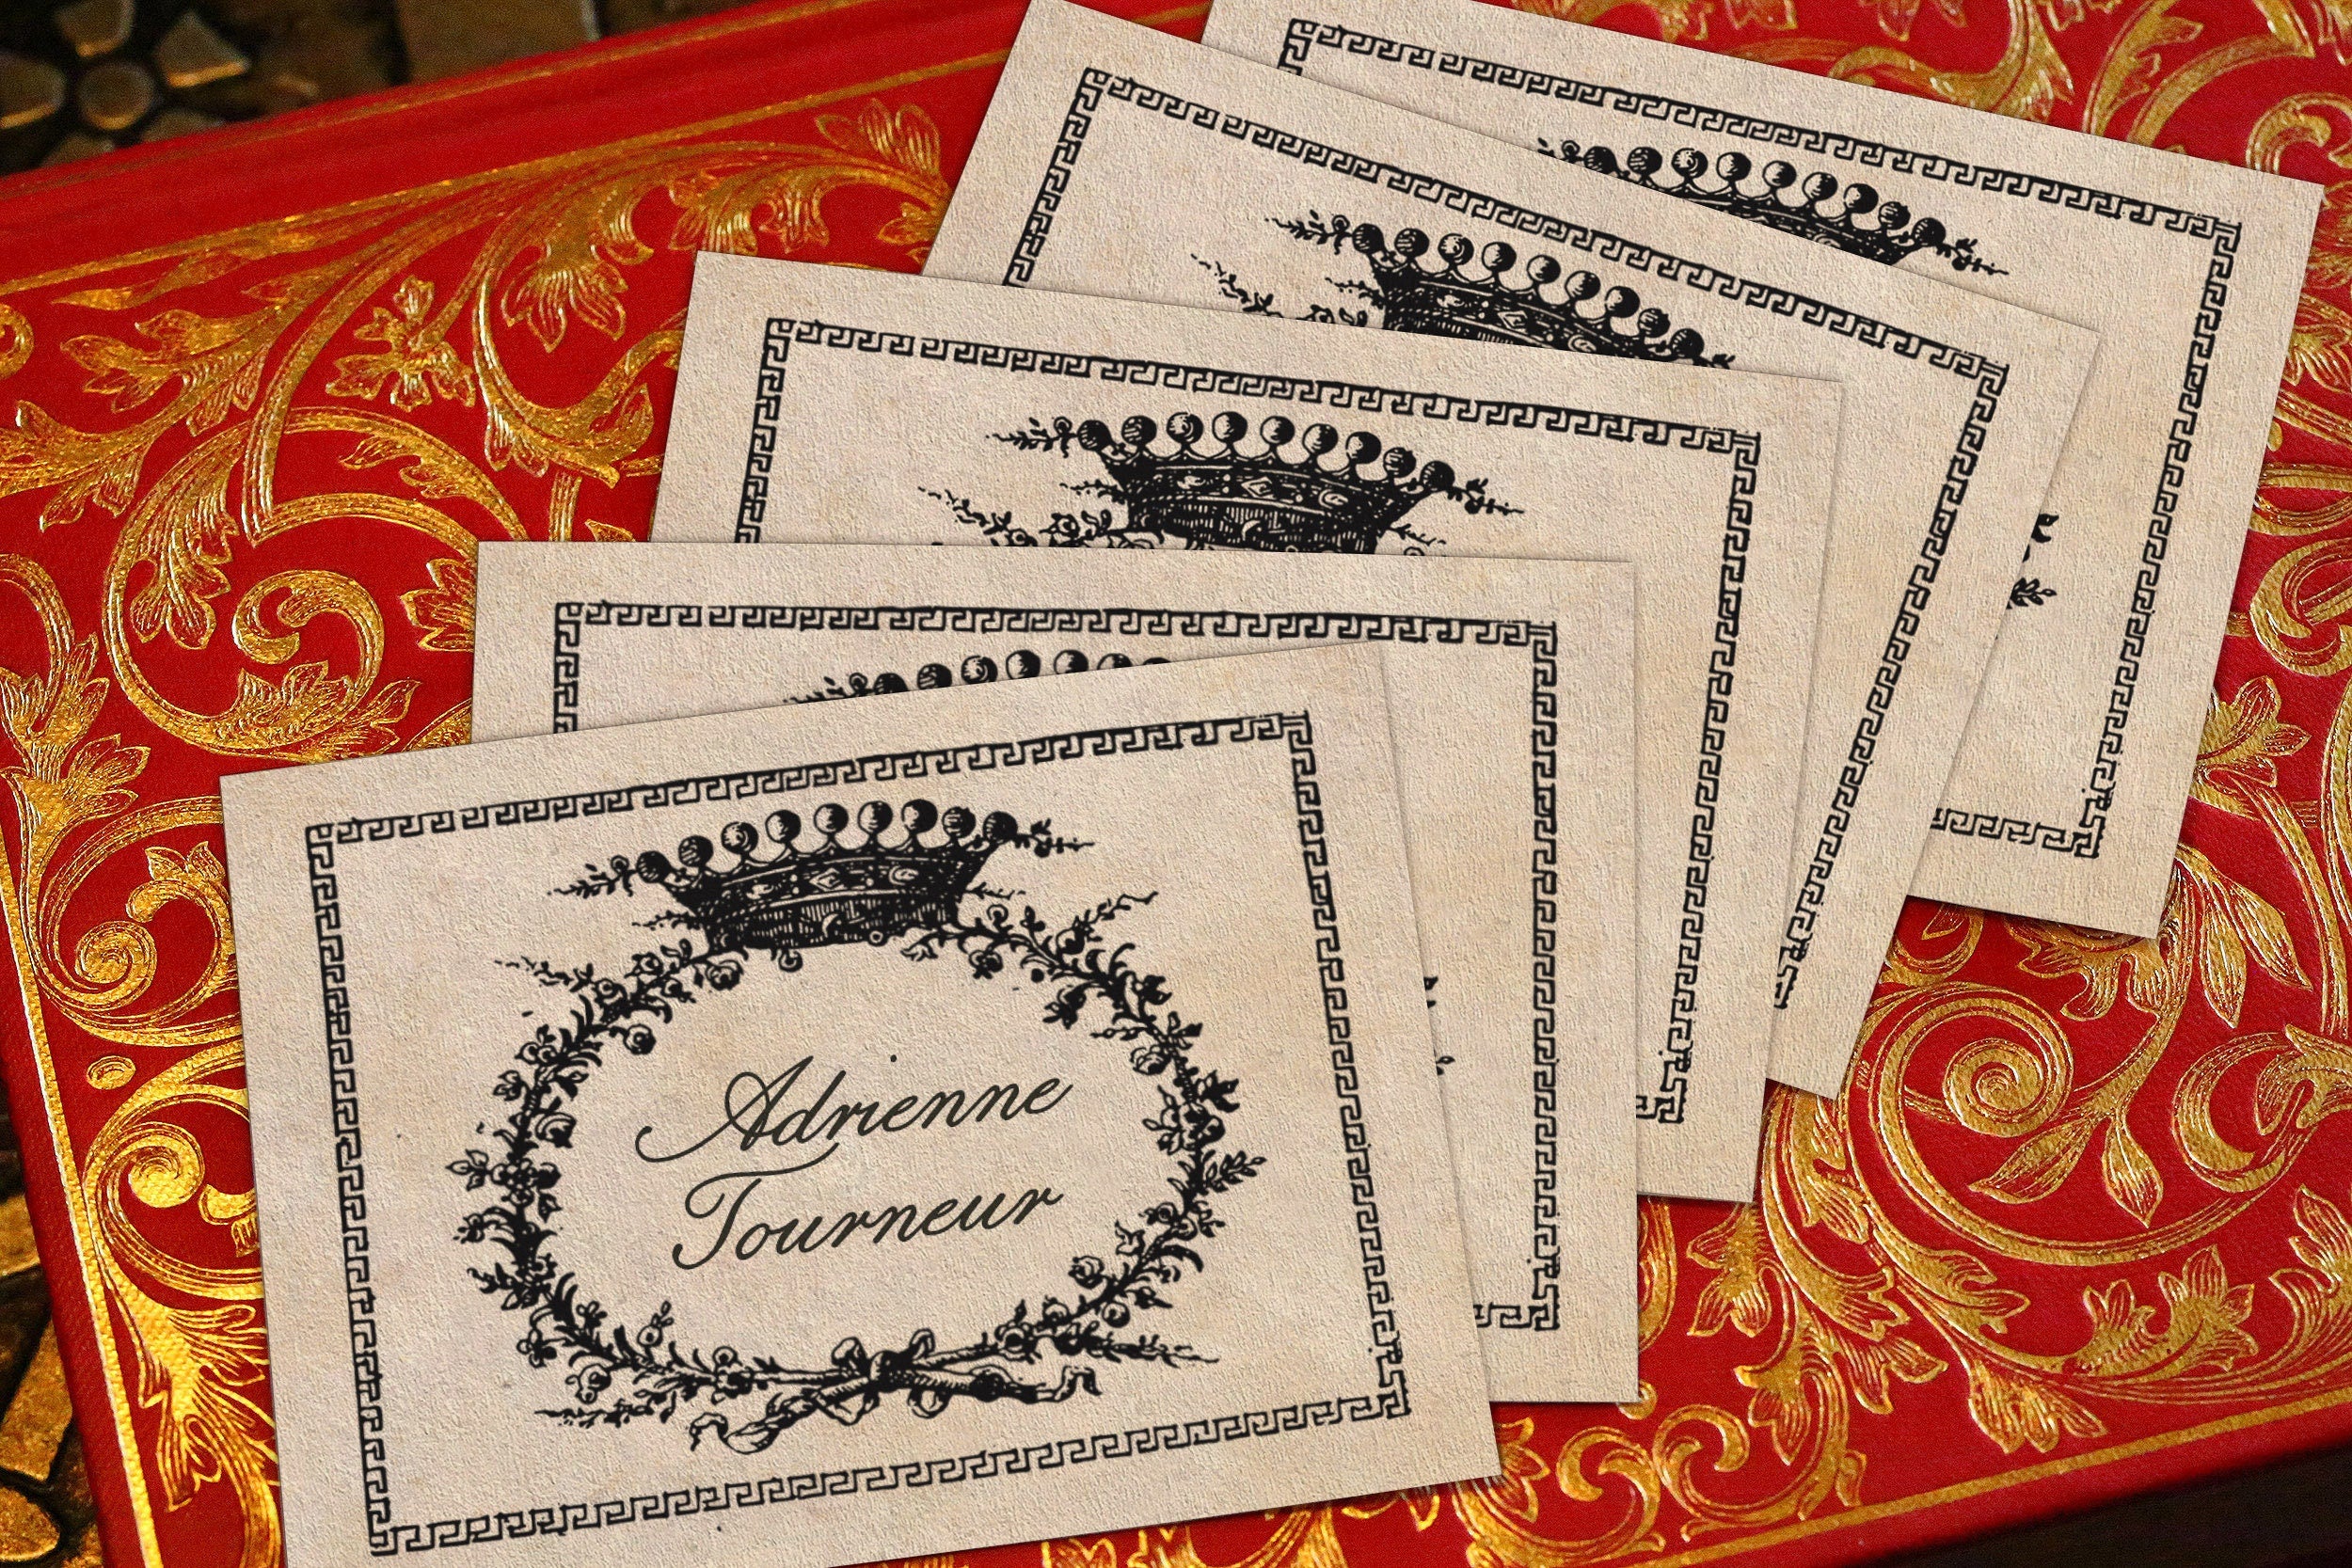 Crown and Wreath, Personalized Ex-Libris Bookplates, or Labels, Crafted on Traditional Gummed Paper, 3.25in x 2.5in, Set of 30